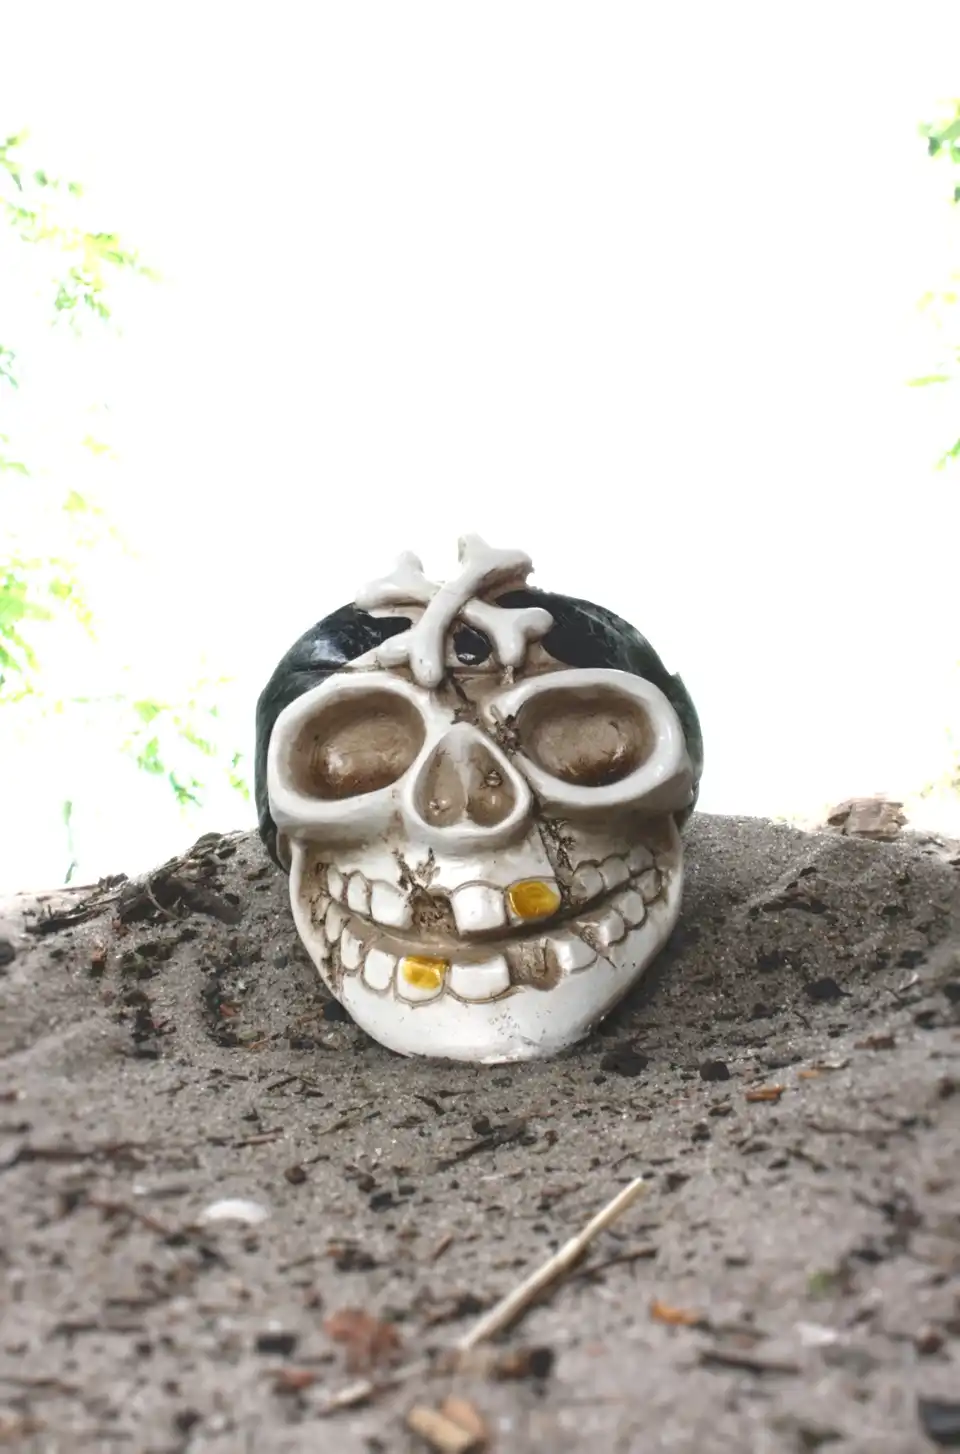 Real photo with a skull ceramic moneybox on the beach with an overexposed river and sky in the background.